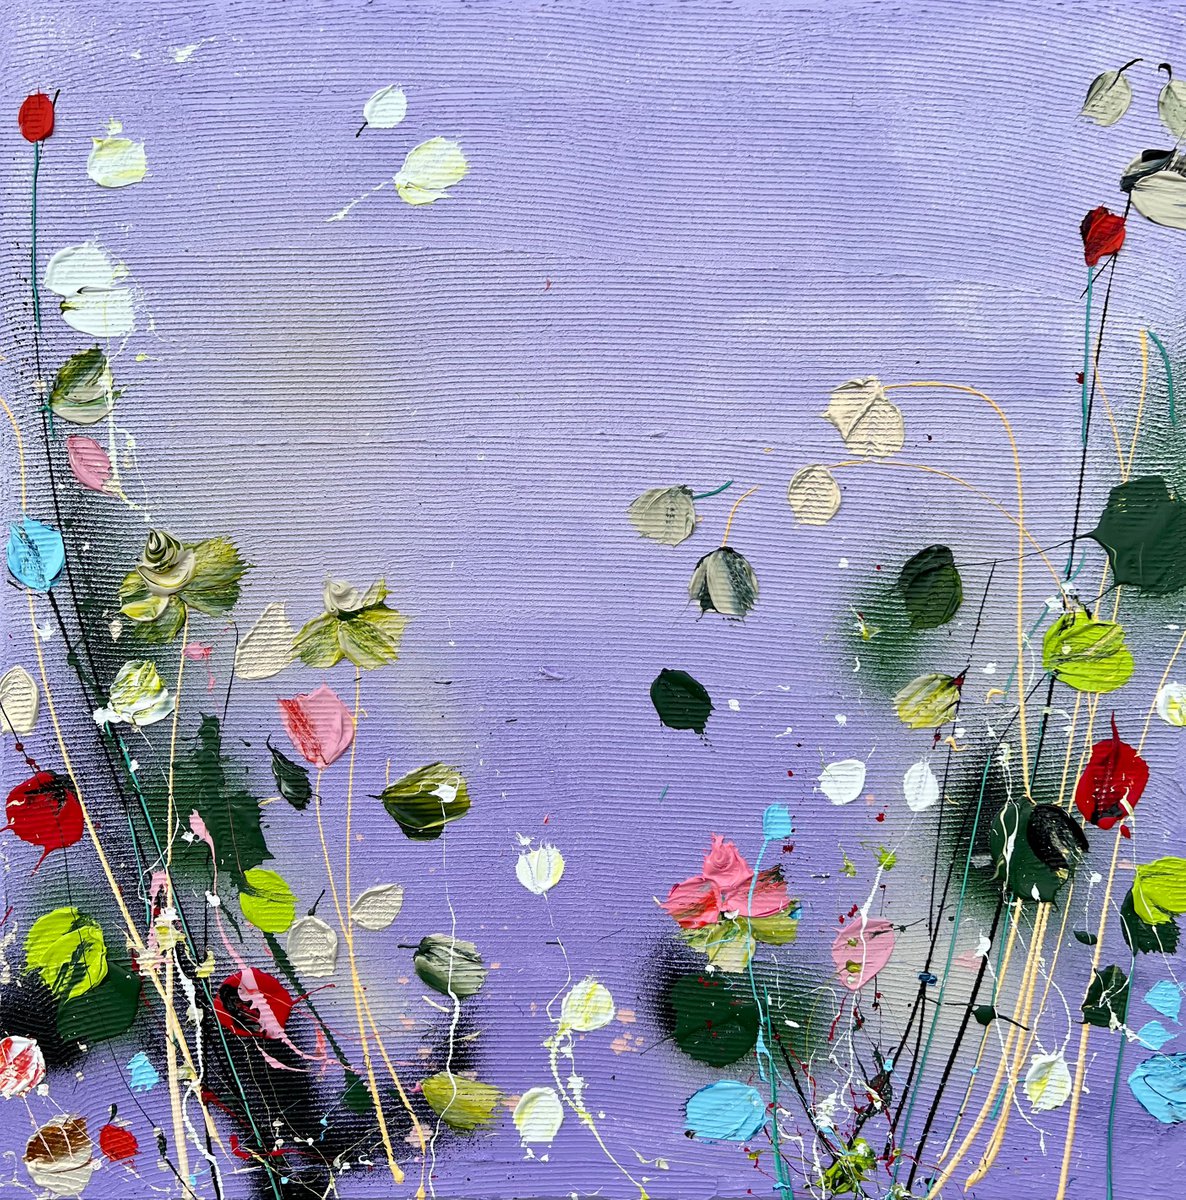 Structure impasto acrylic painting with abstract flowers 60x60cm Purple Day by Anastassia Skopp